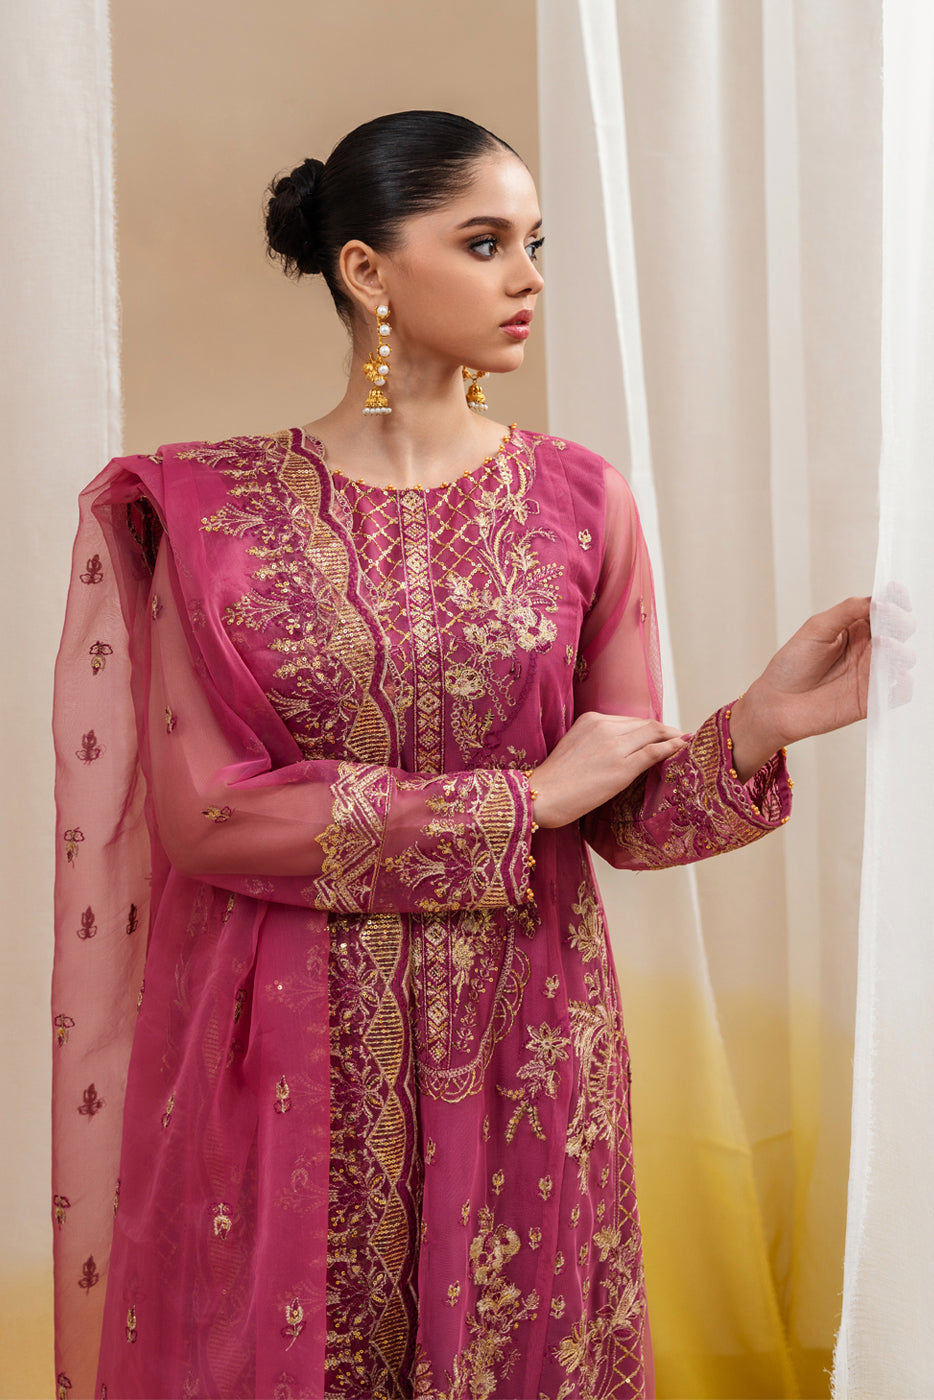 4 PIECE EMBROIDERED ORGANZA NET SUIT-FUCHSIA FANTASY (UNSTITCHED) - BEECHTREE